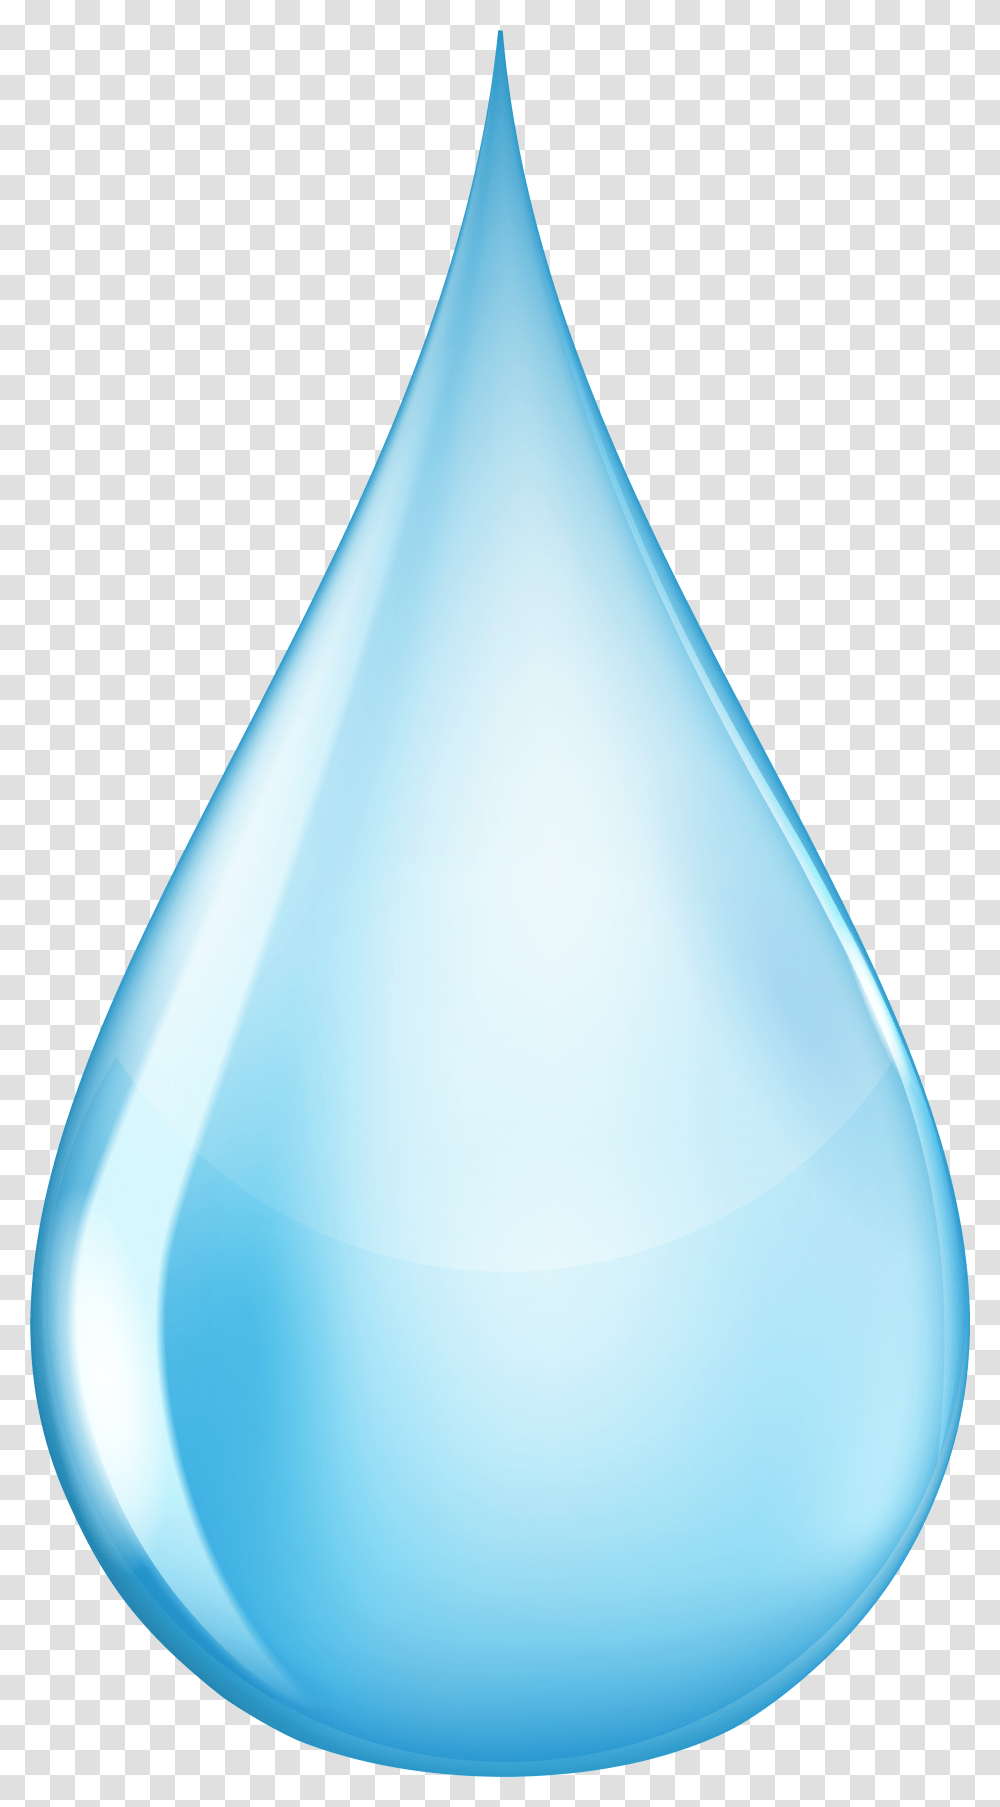 Water Drop Clip Art Gallery Yopriceville Tints And Shades Transparent Png